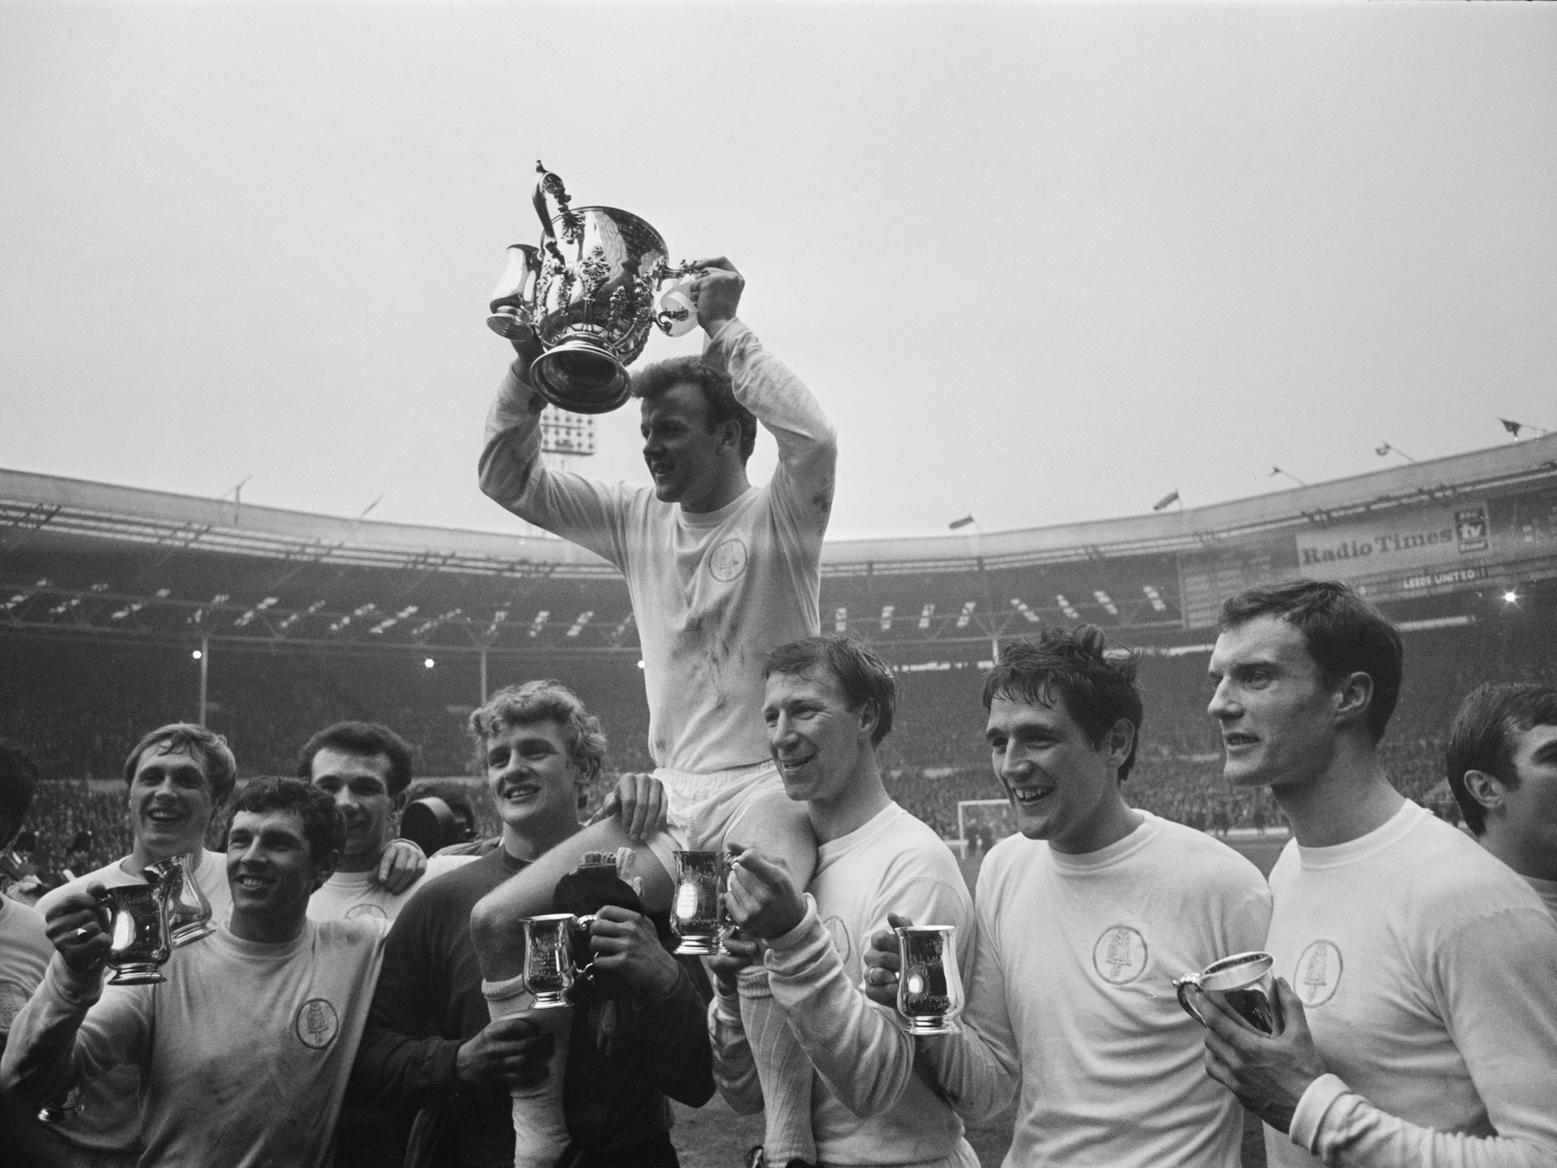 Leeds United captain Billy Bremner (1942 - 1997) and fellow players hold trophies after winning the League Cup final against Arsenal.